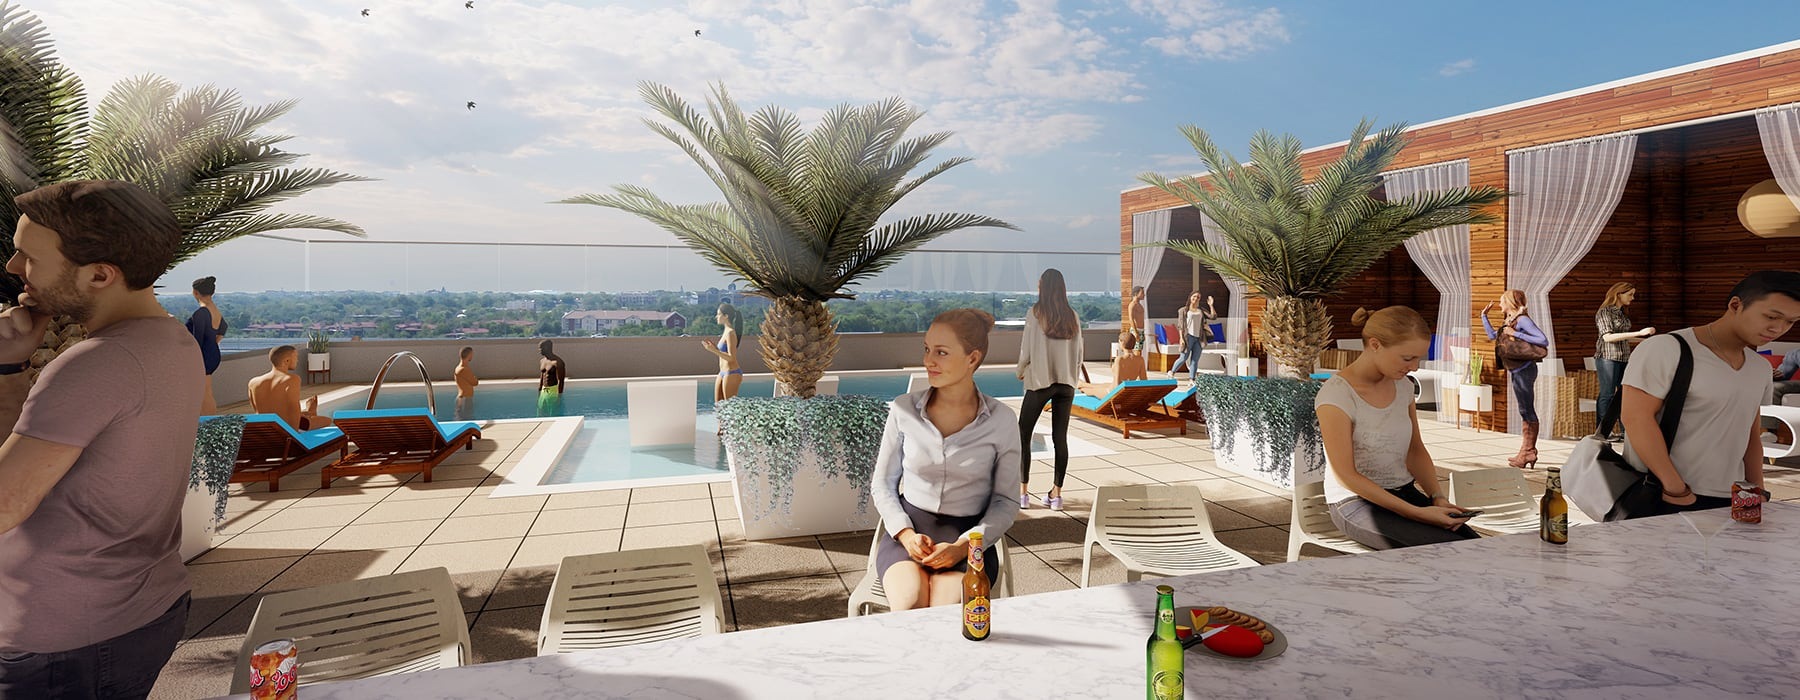 rendering of pool showing tropical landscaping, modern pool design and a nearby resident bar with bar seating